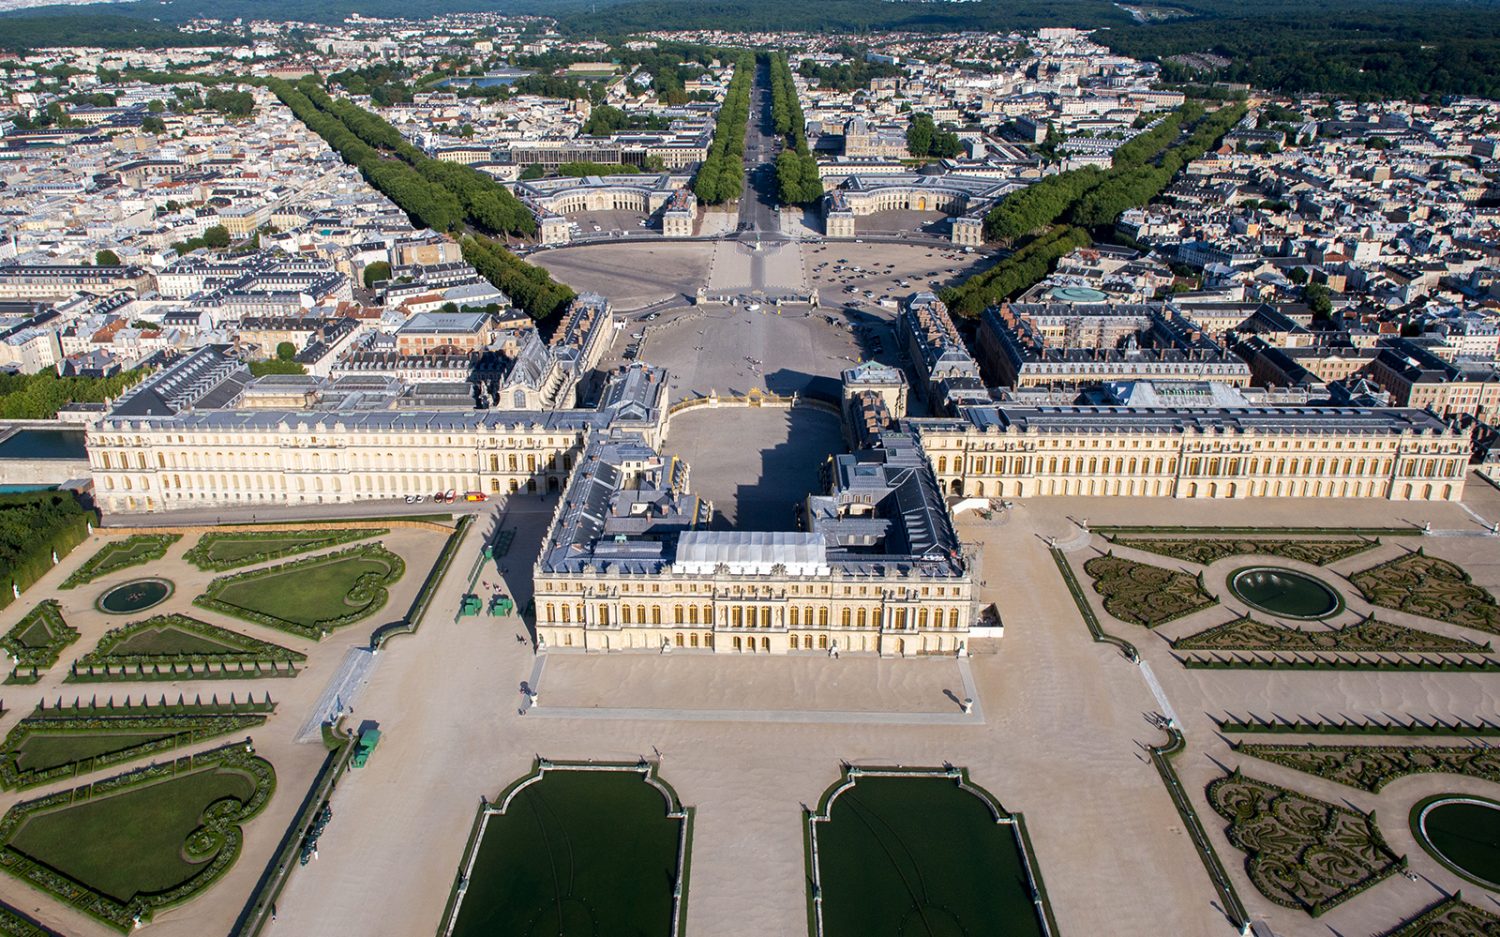 Palace of Versailles All Access – Passport Entry! Includes Audio Guide - Only £16.33 | Tickets.co.uk